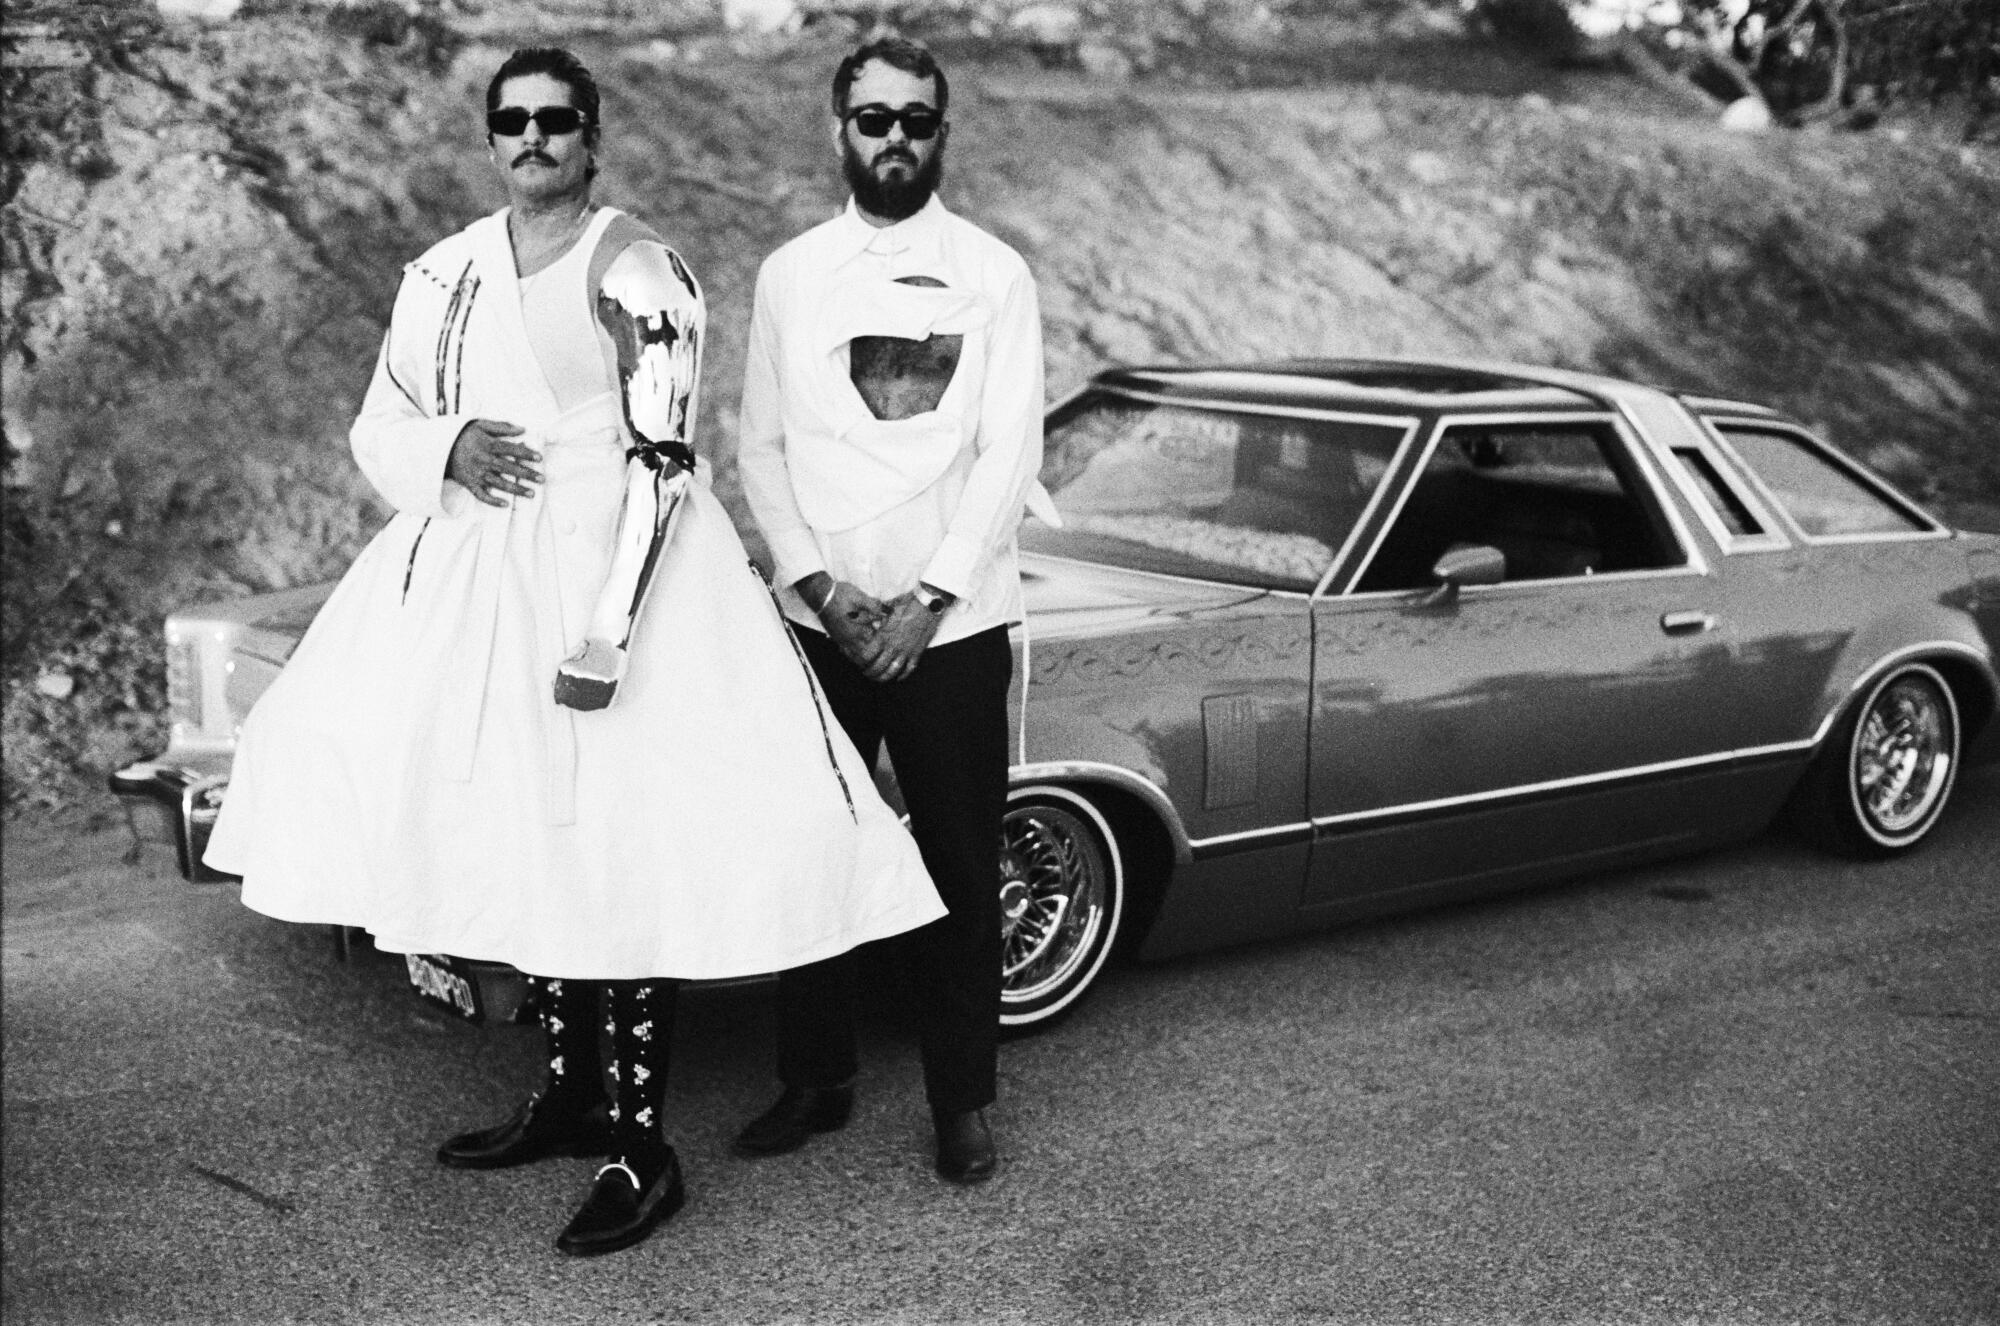 rafa esparza and Timo Fahler, posing in front of lowrider car